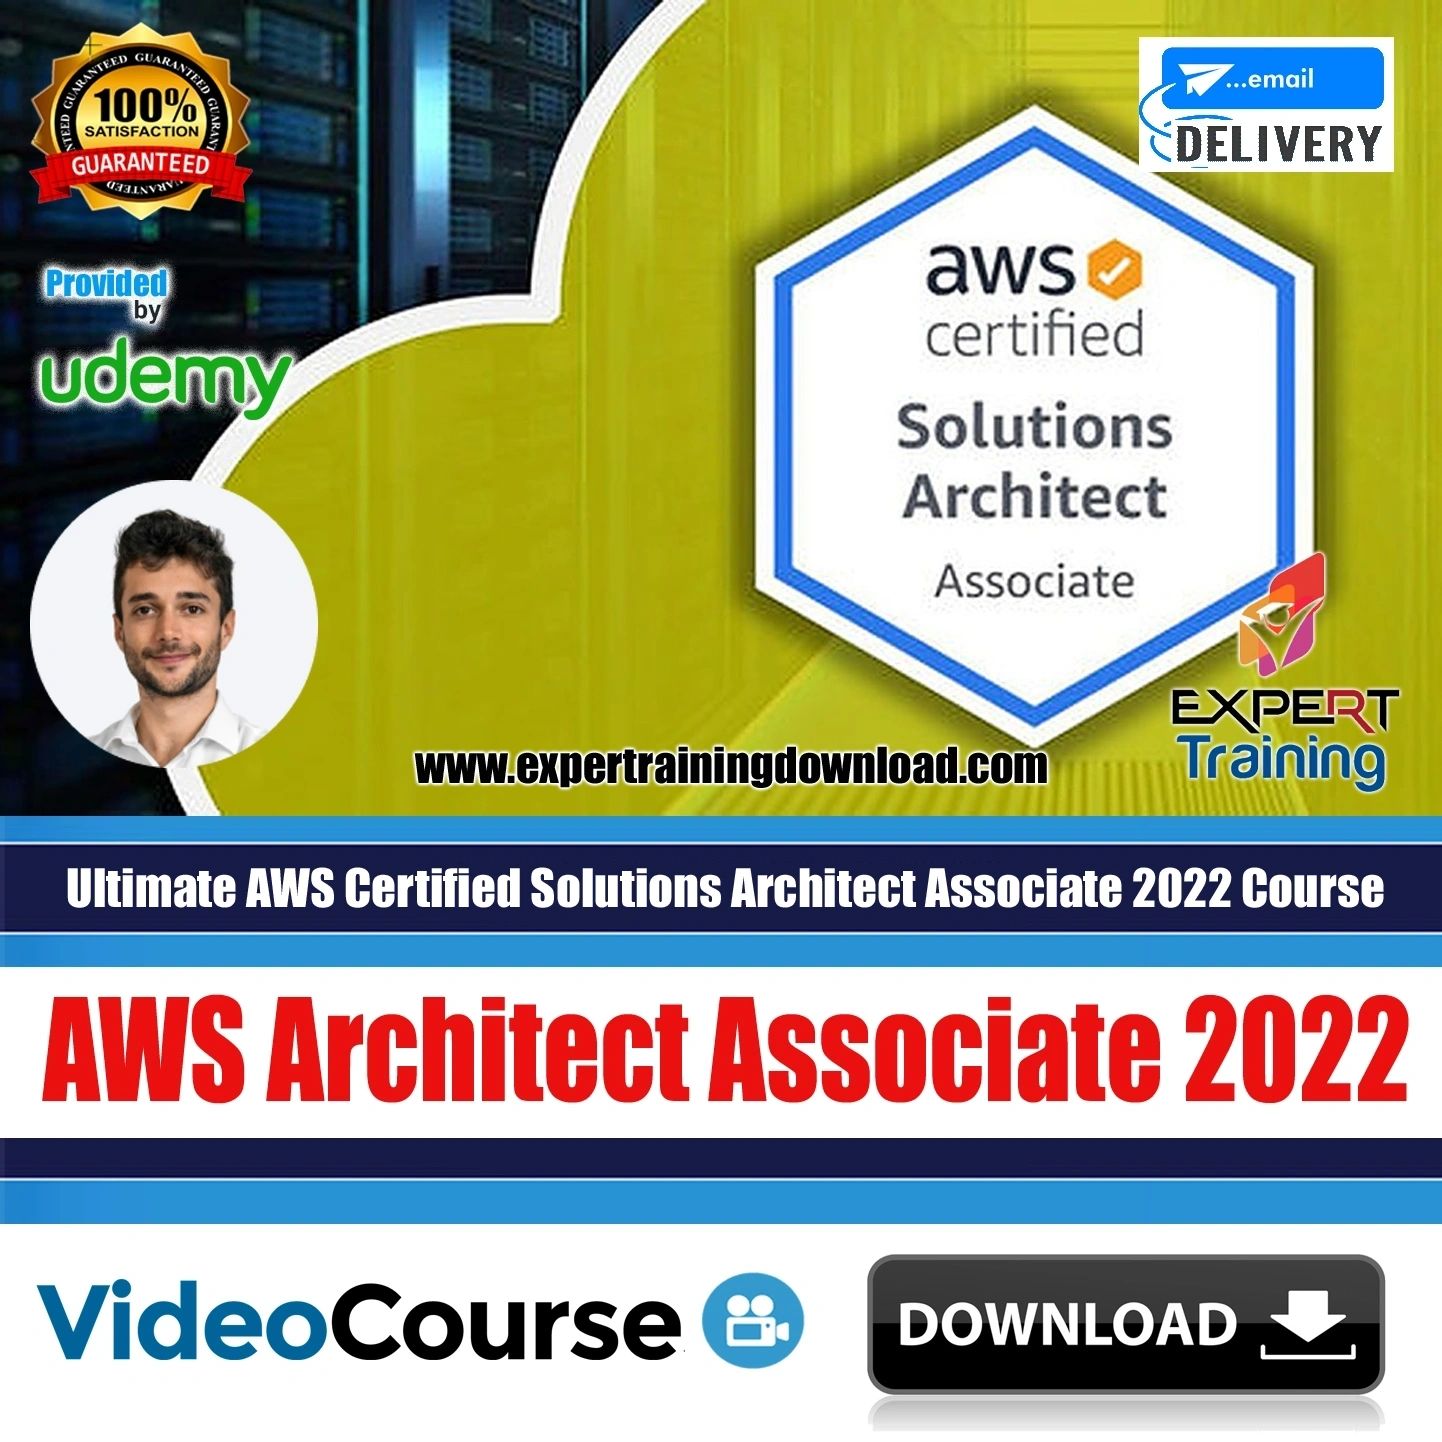 Ultimate AWS Certified Solutions Architect Associate 2022 Course & PDF Guides